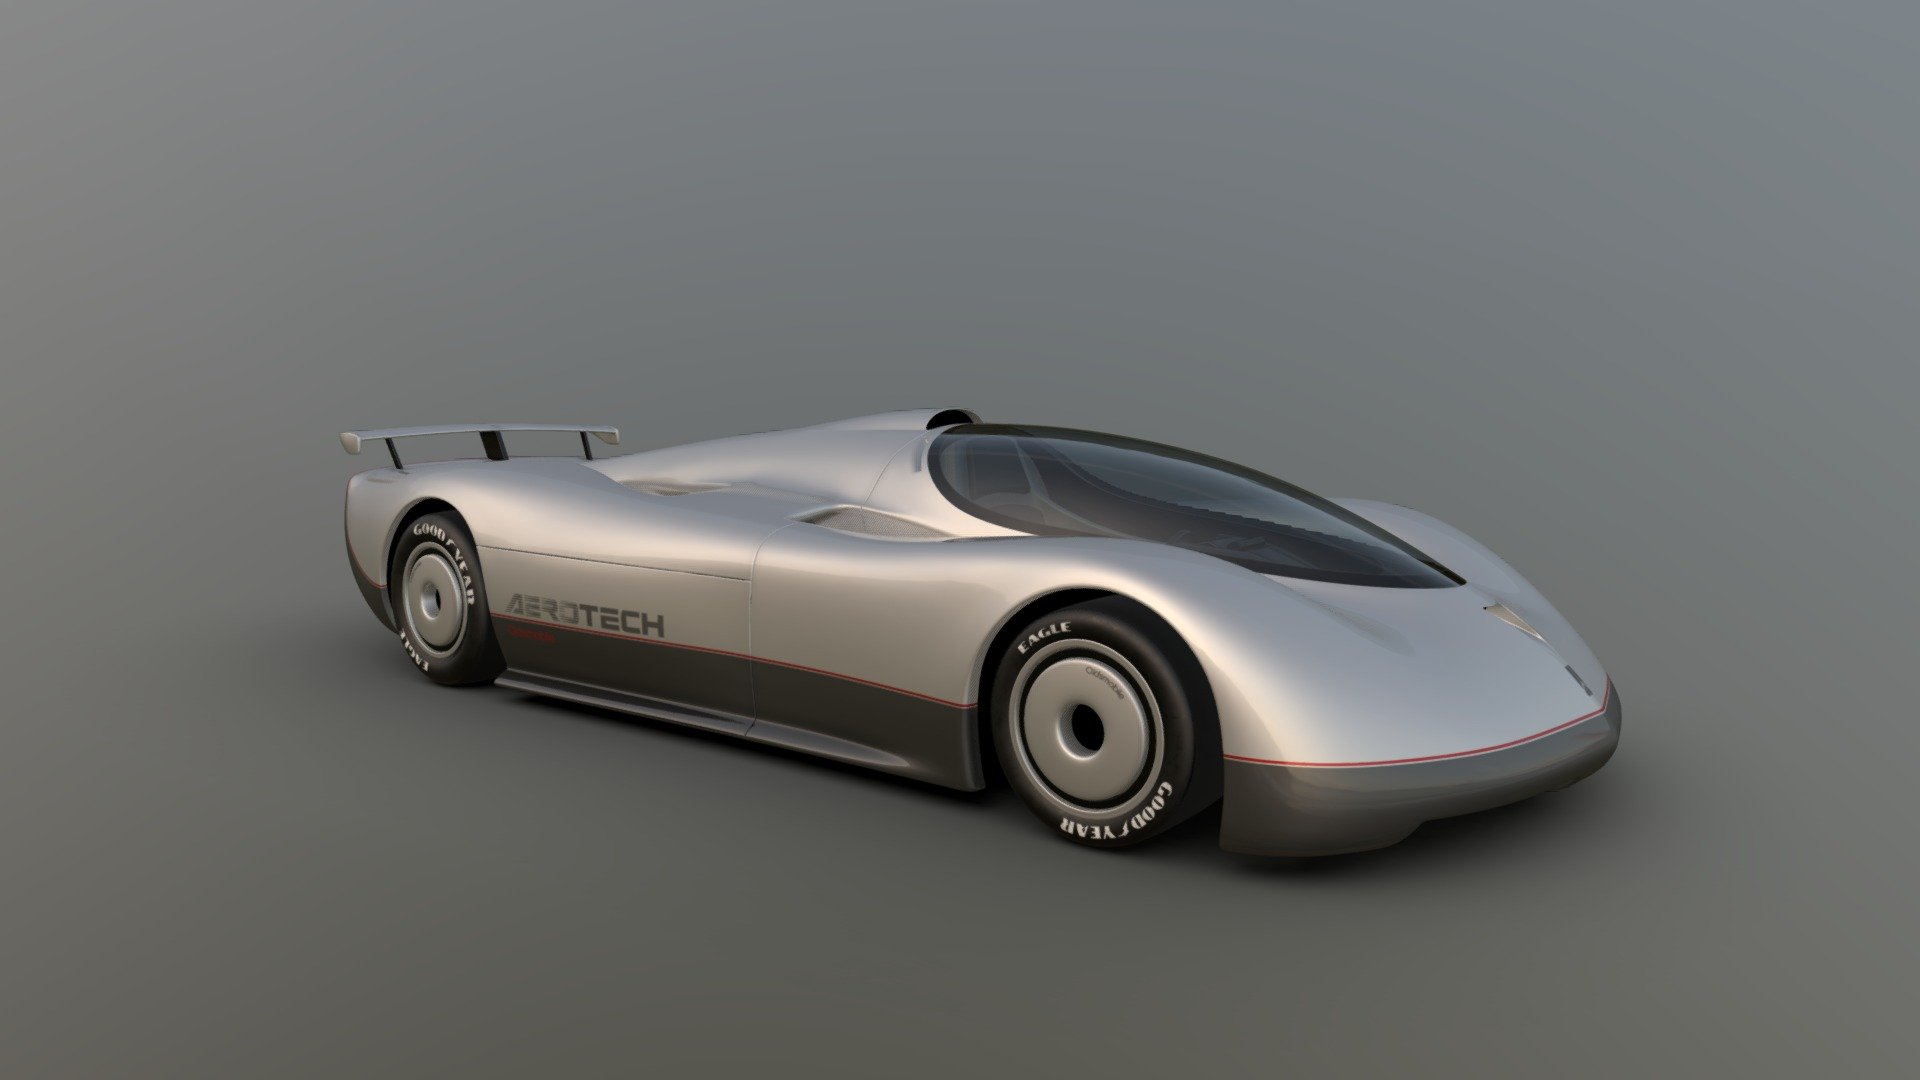 When I first this car I was fascinated by it's beautiful simple forms and design. I'm also happy I could be the first to model this masterpiece sportscar.

More images and wip:
https://www.behance.net/portfolio/editor?project_id=182035965

Infos about the car:

https://www.supercars.net/blog/1987-oldsmobile-aerotech-st/
https://flaviendachet.blogspot.com/2012/02/87-oldsmobile-aerotech-design-story.html

1987 Oldsmobile Aerotech flying-mile record video
https://www.youtube.com/watch?v=zlR2P7oY68o - Oldsmobile Aerotech 1987 - Buy Royalty Free 3D model by Andras Pall (@pall.andras) 3d model